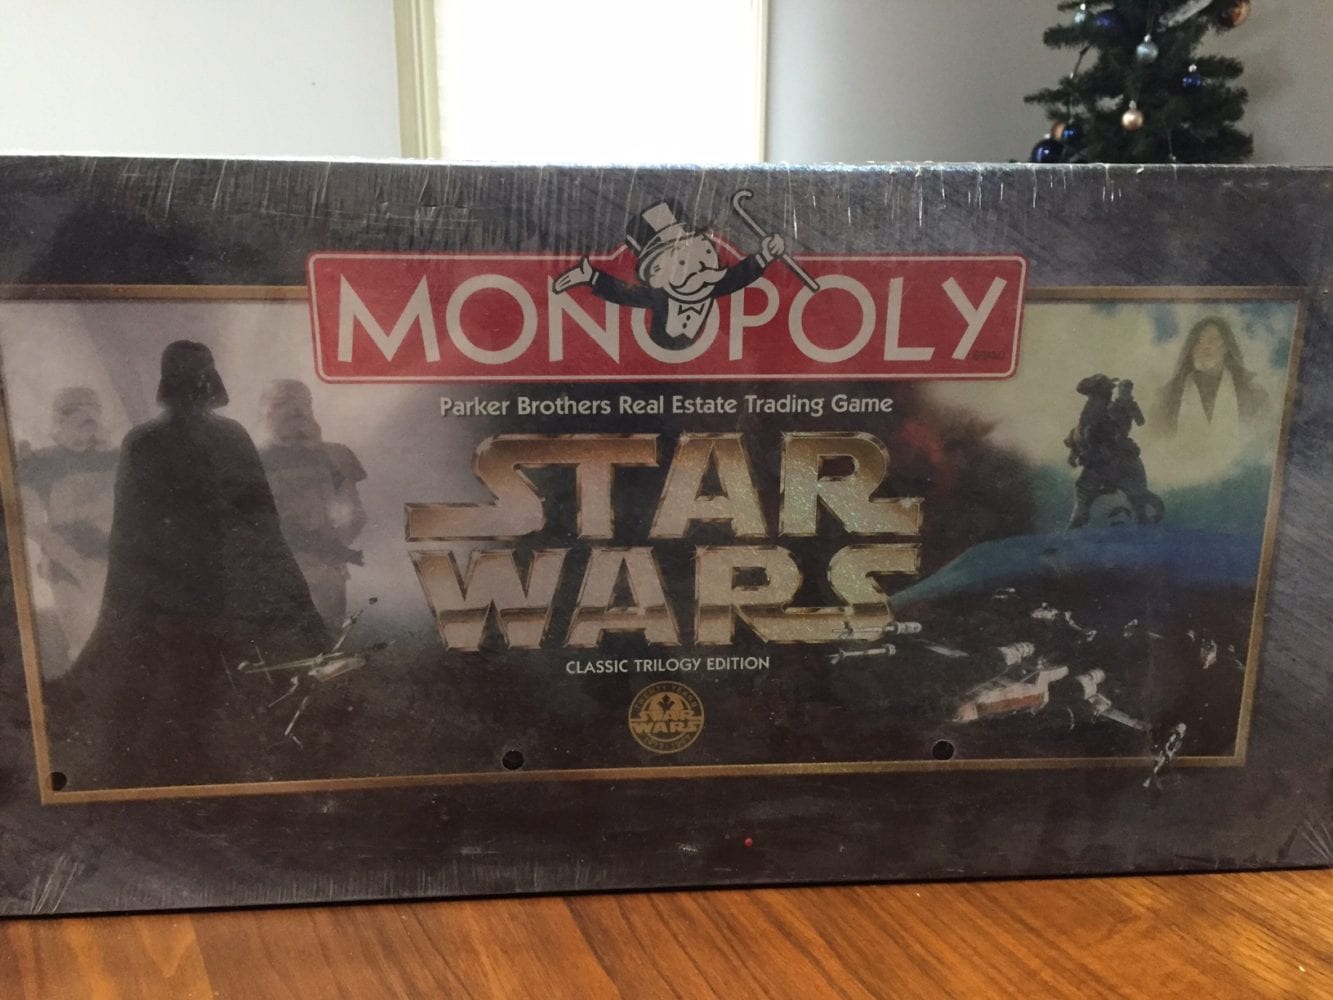 star wars monopoly episode 1 collector edition